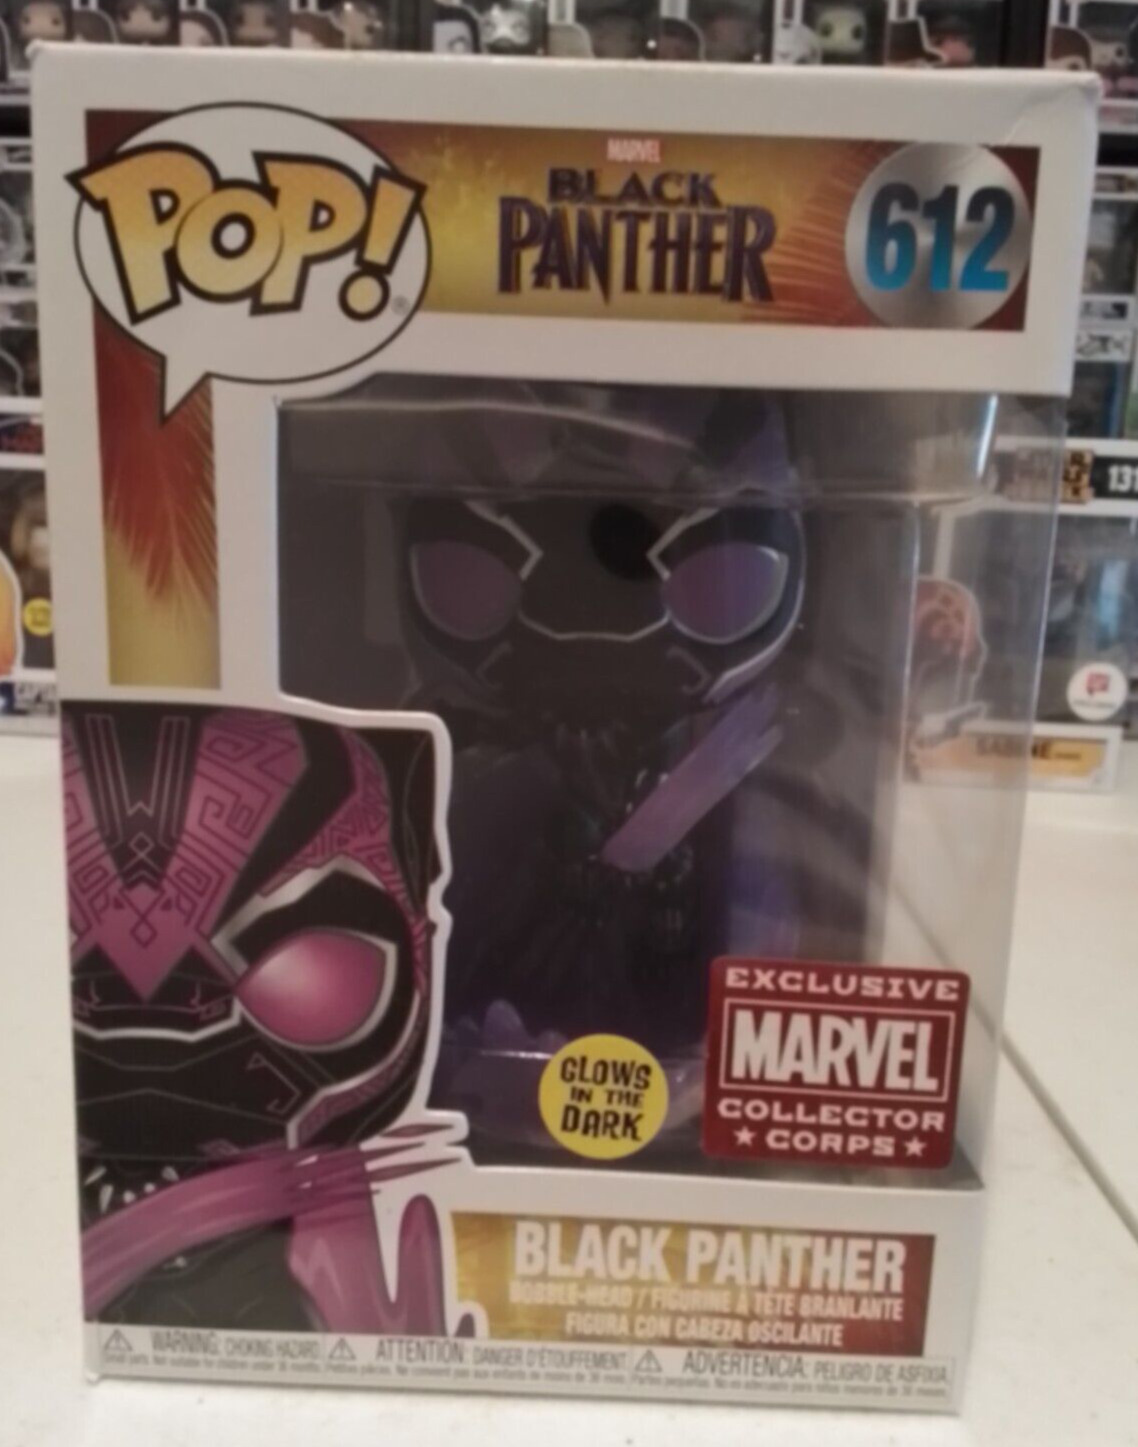 Funko Pop #612 Black Panther - Glow in the Dark - Marvel Collector Corps